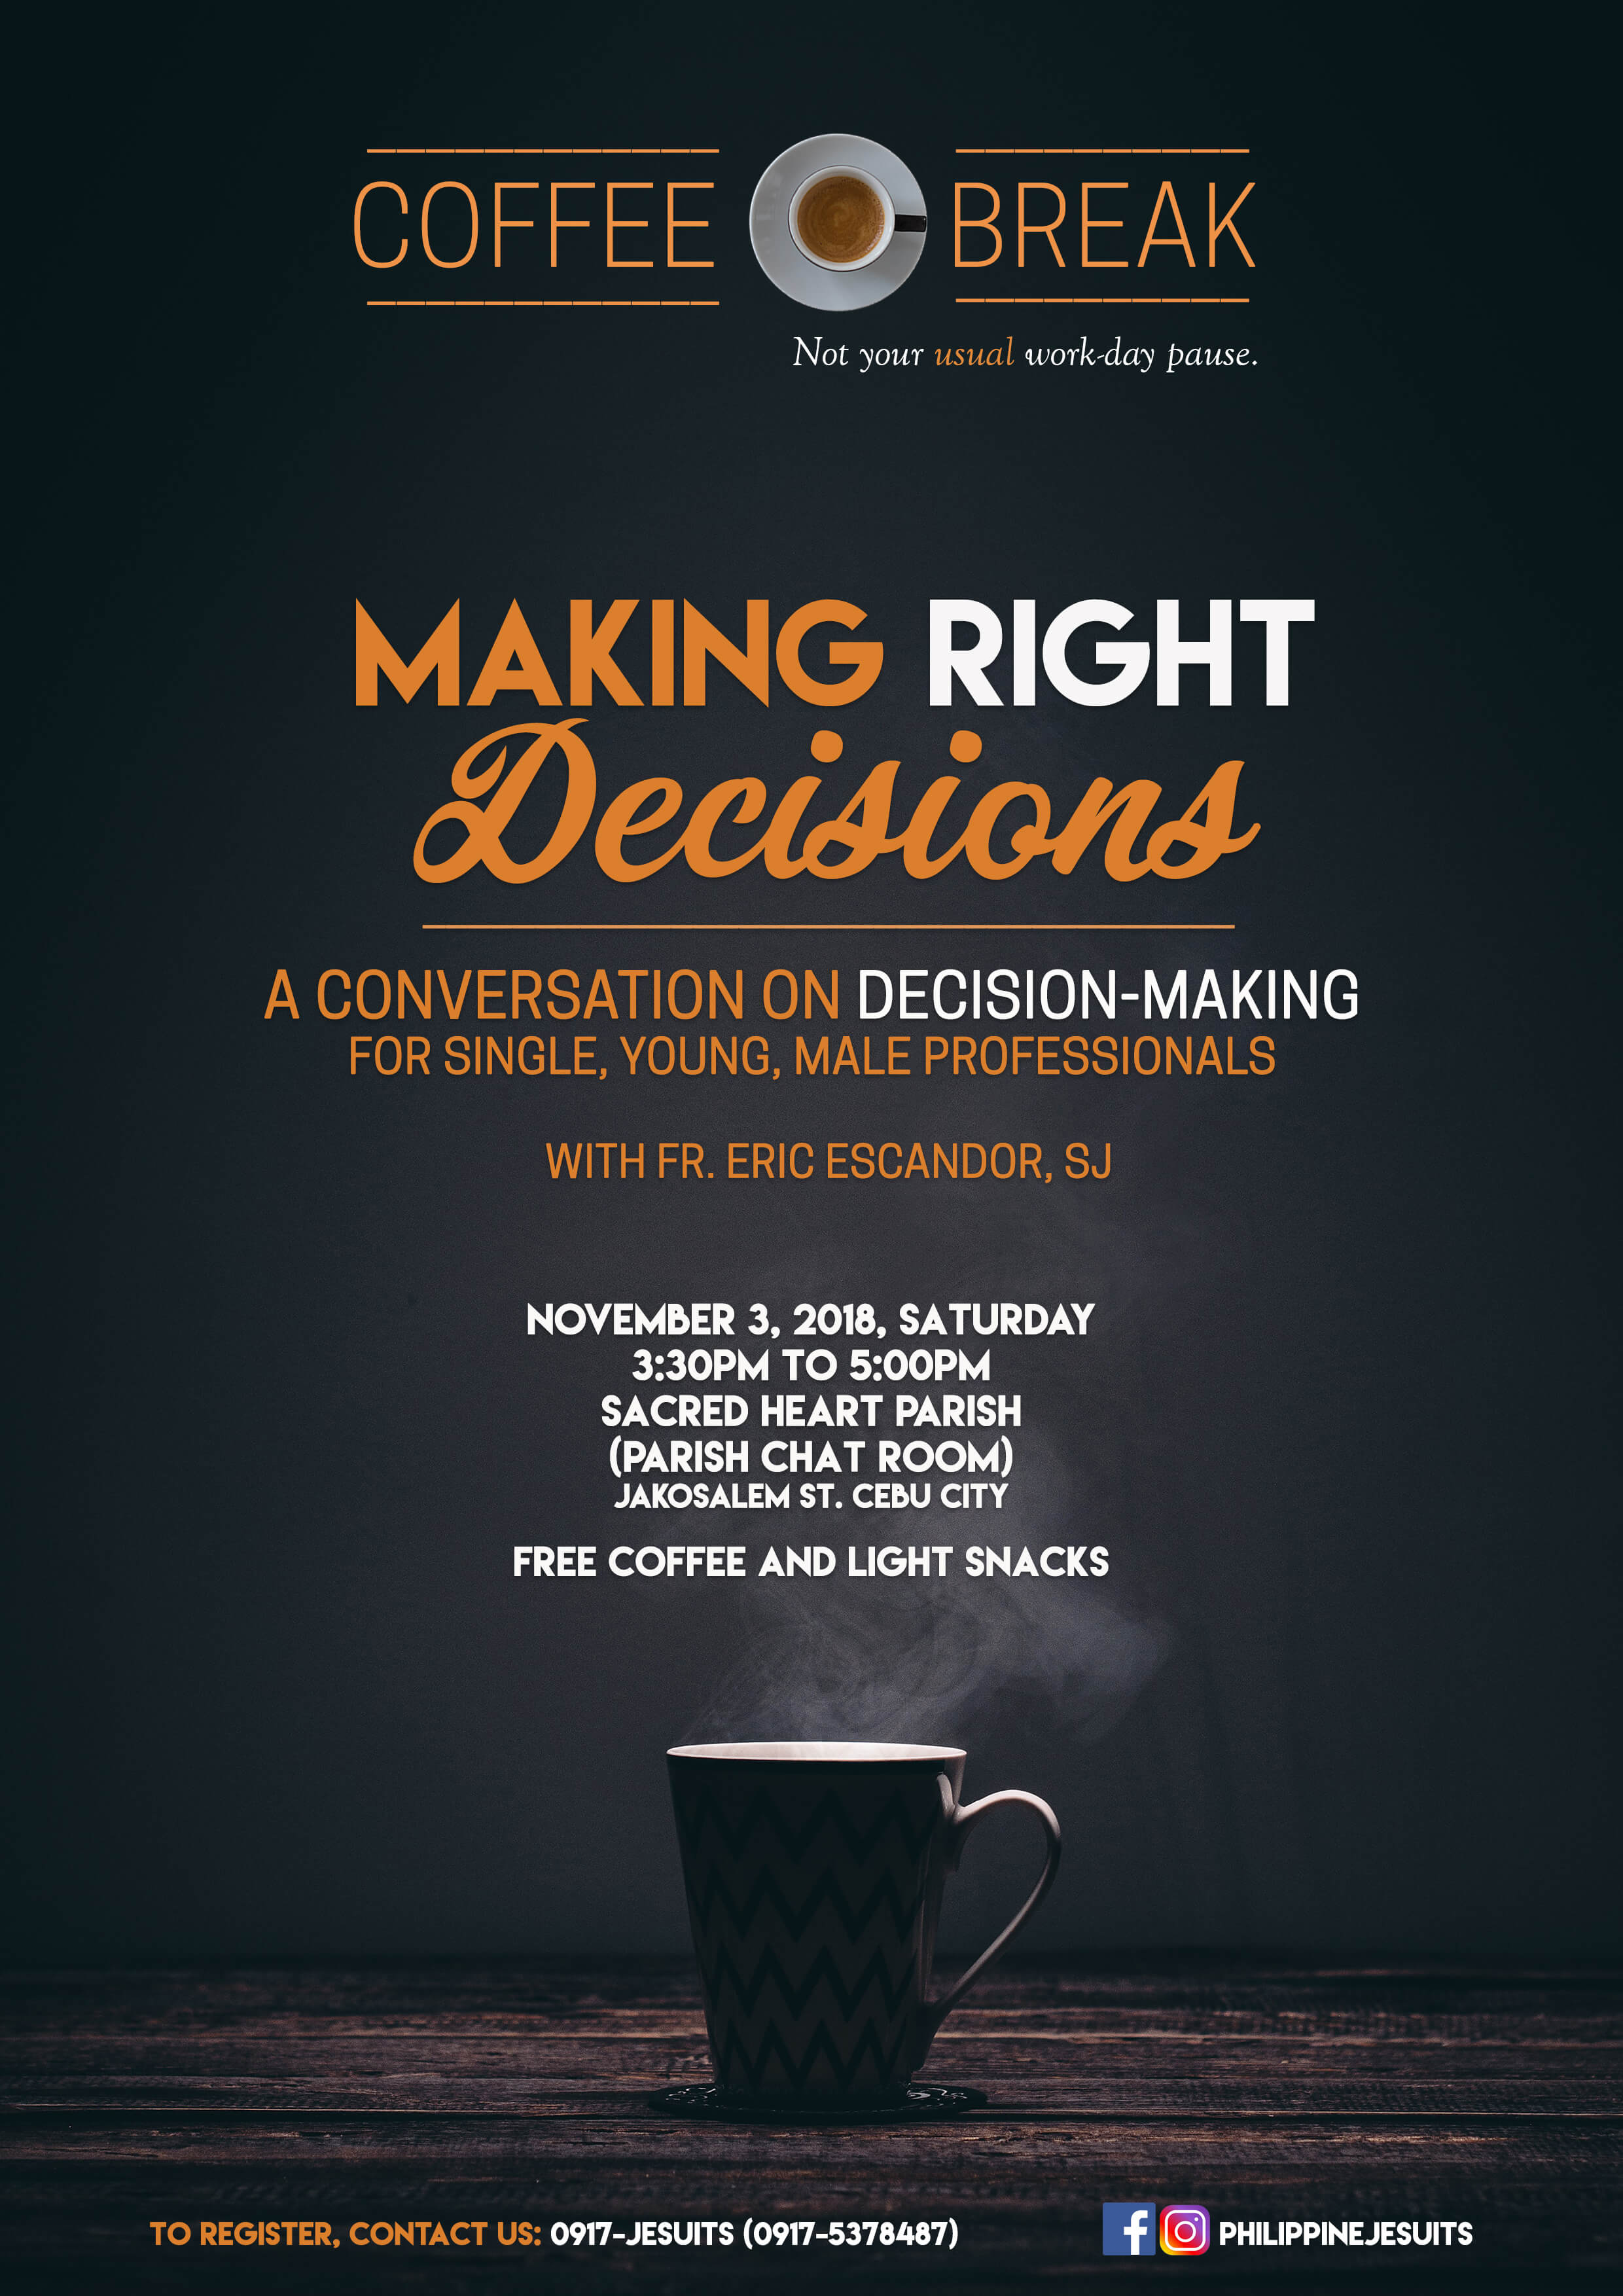 CoffeeBreak Presents: How To Make Right Decisions?